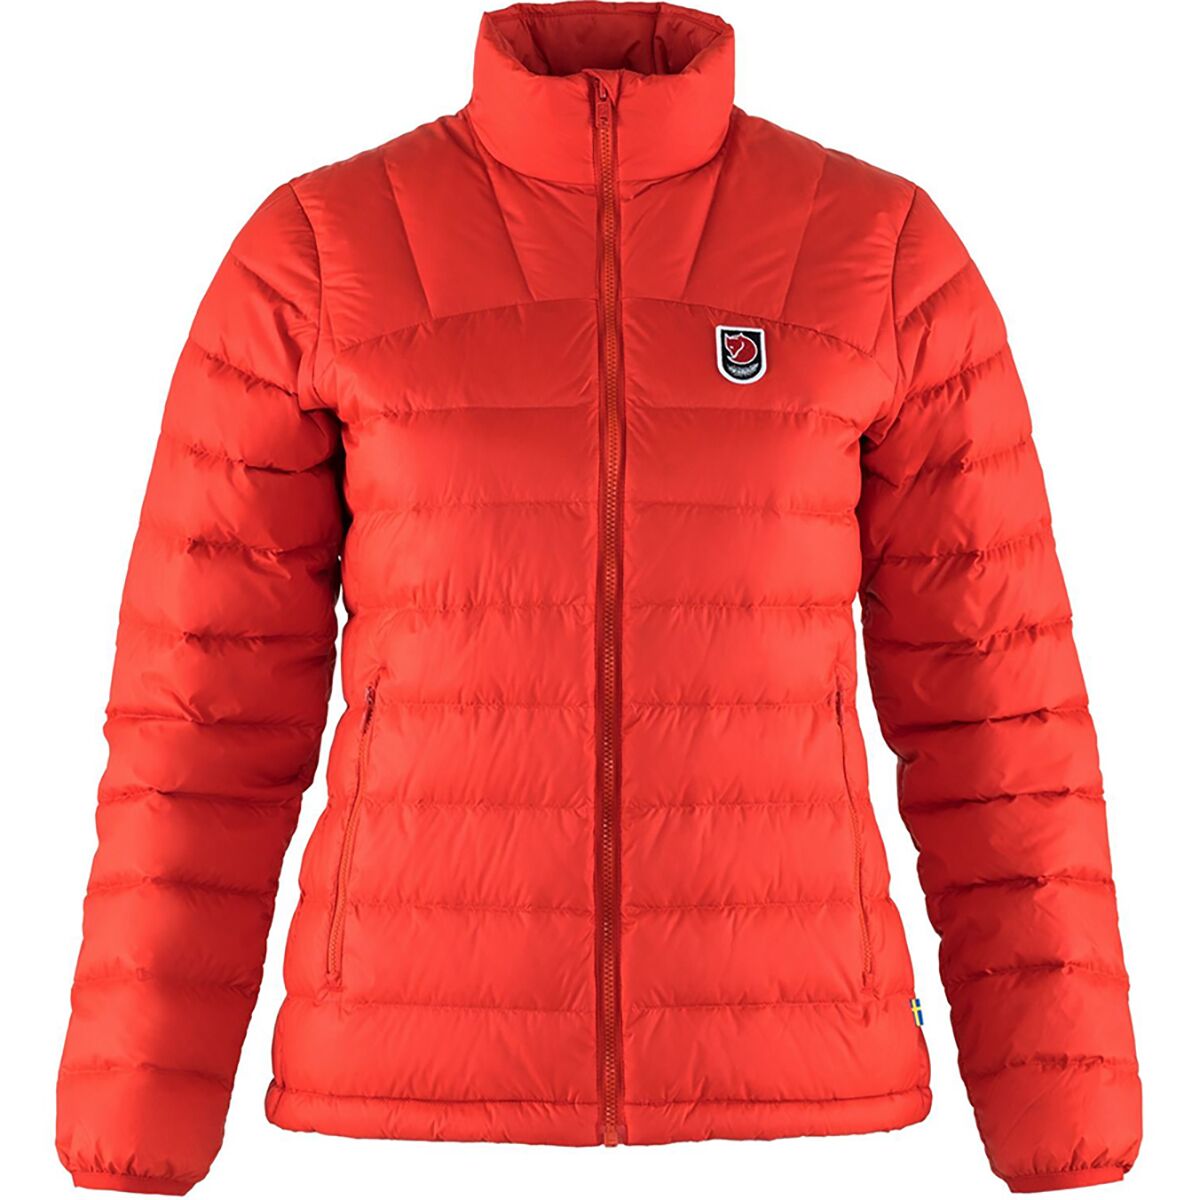 Expedition Pack Down Jacket - Women